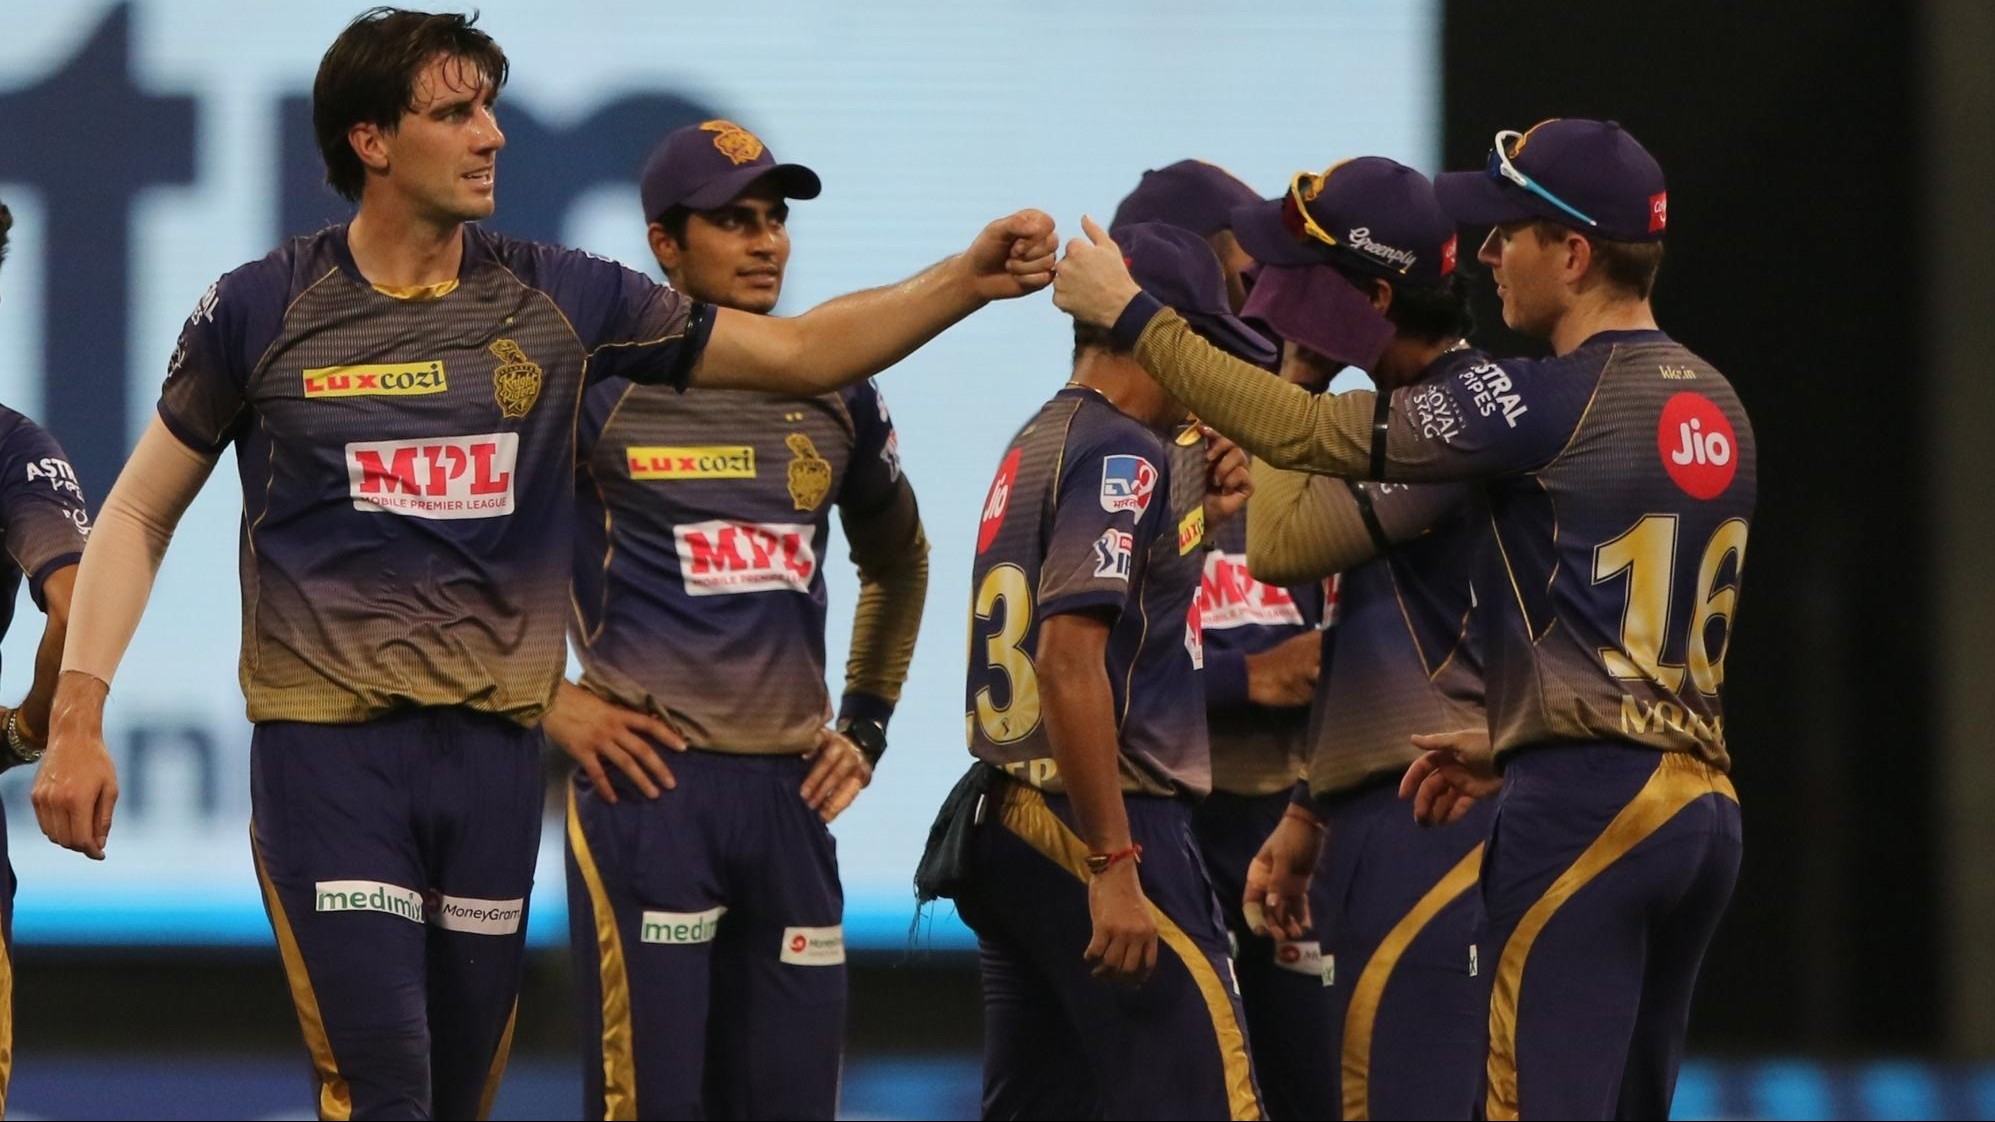 IPL 2020: ‘Haven't played our best cricket yet’, says KKR pacer Pat Cummins ahead of MI clash